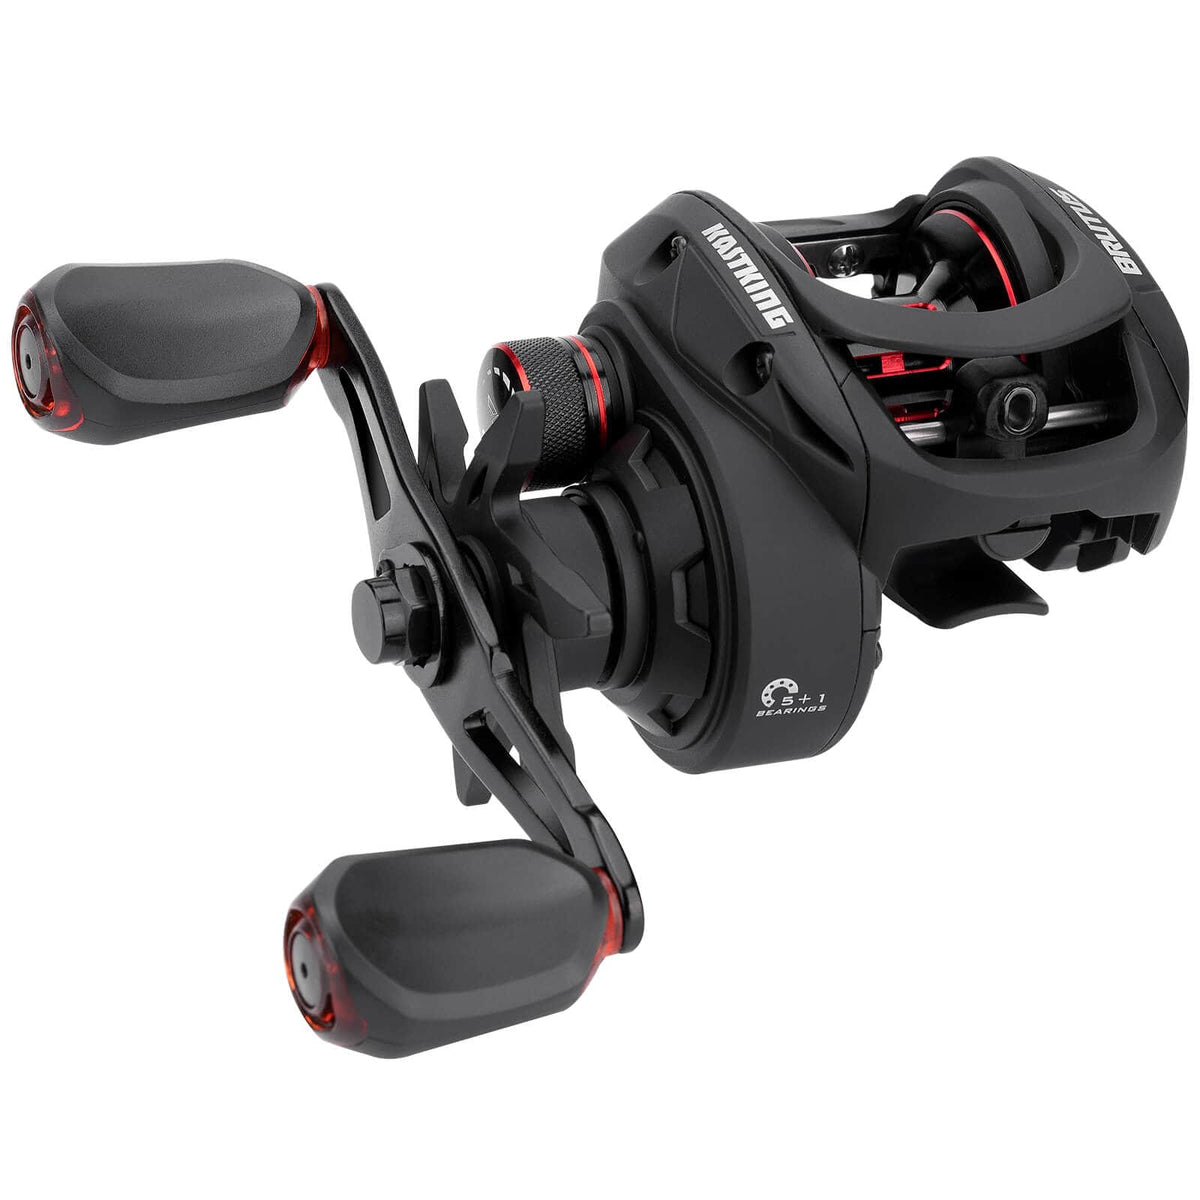 ONE YEAR LATER KastKing Brutus Spinning Reel and Speed Demon Pro